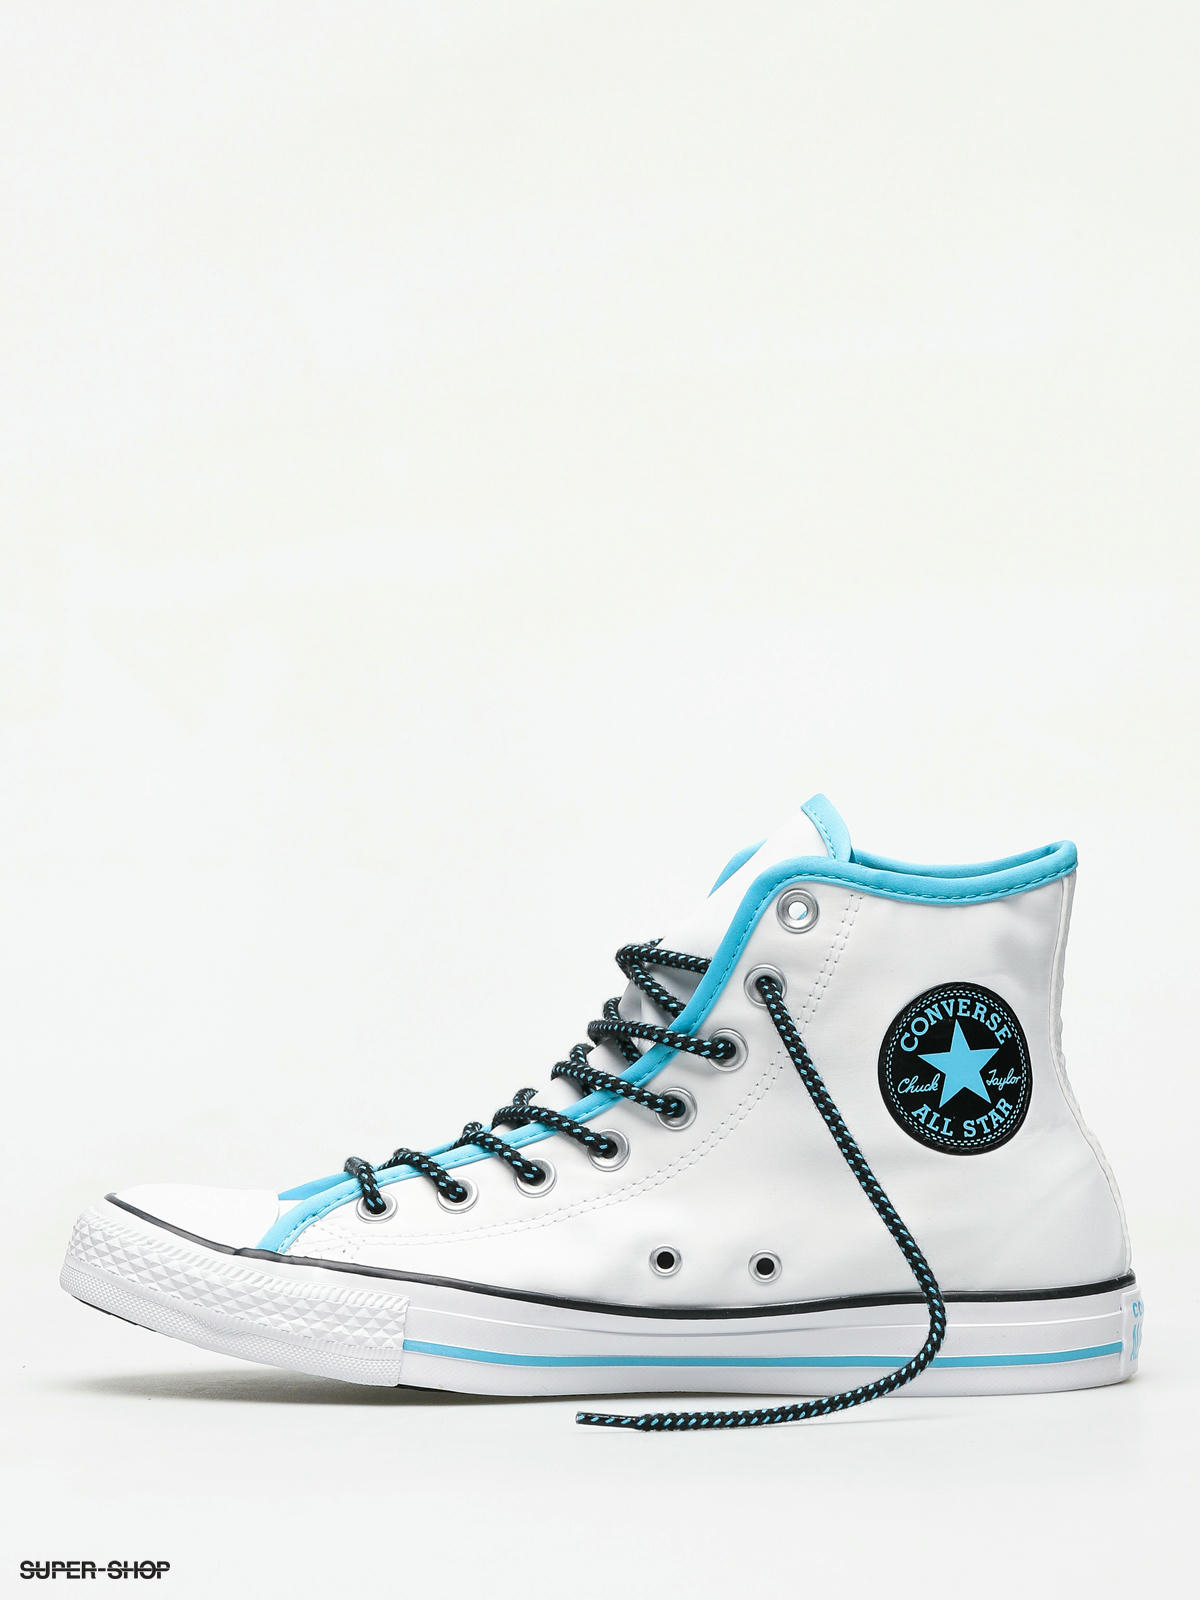 blue and white chuck taylors